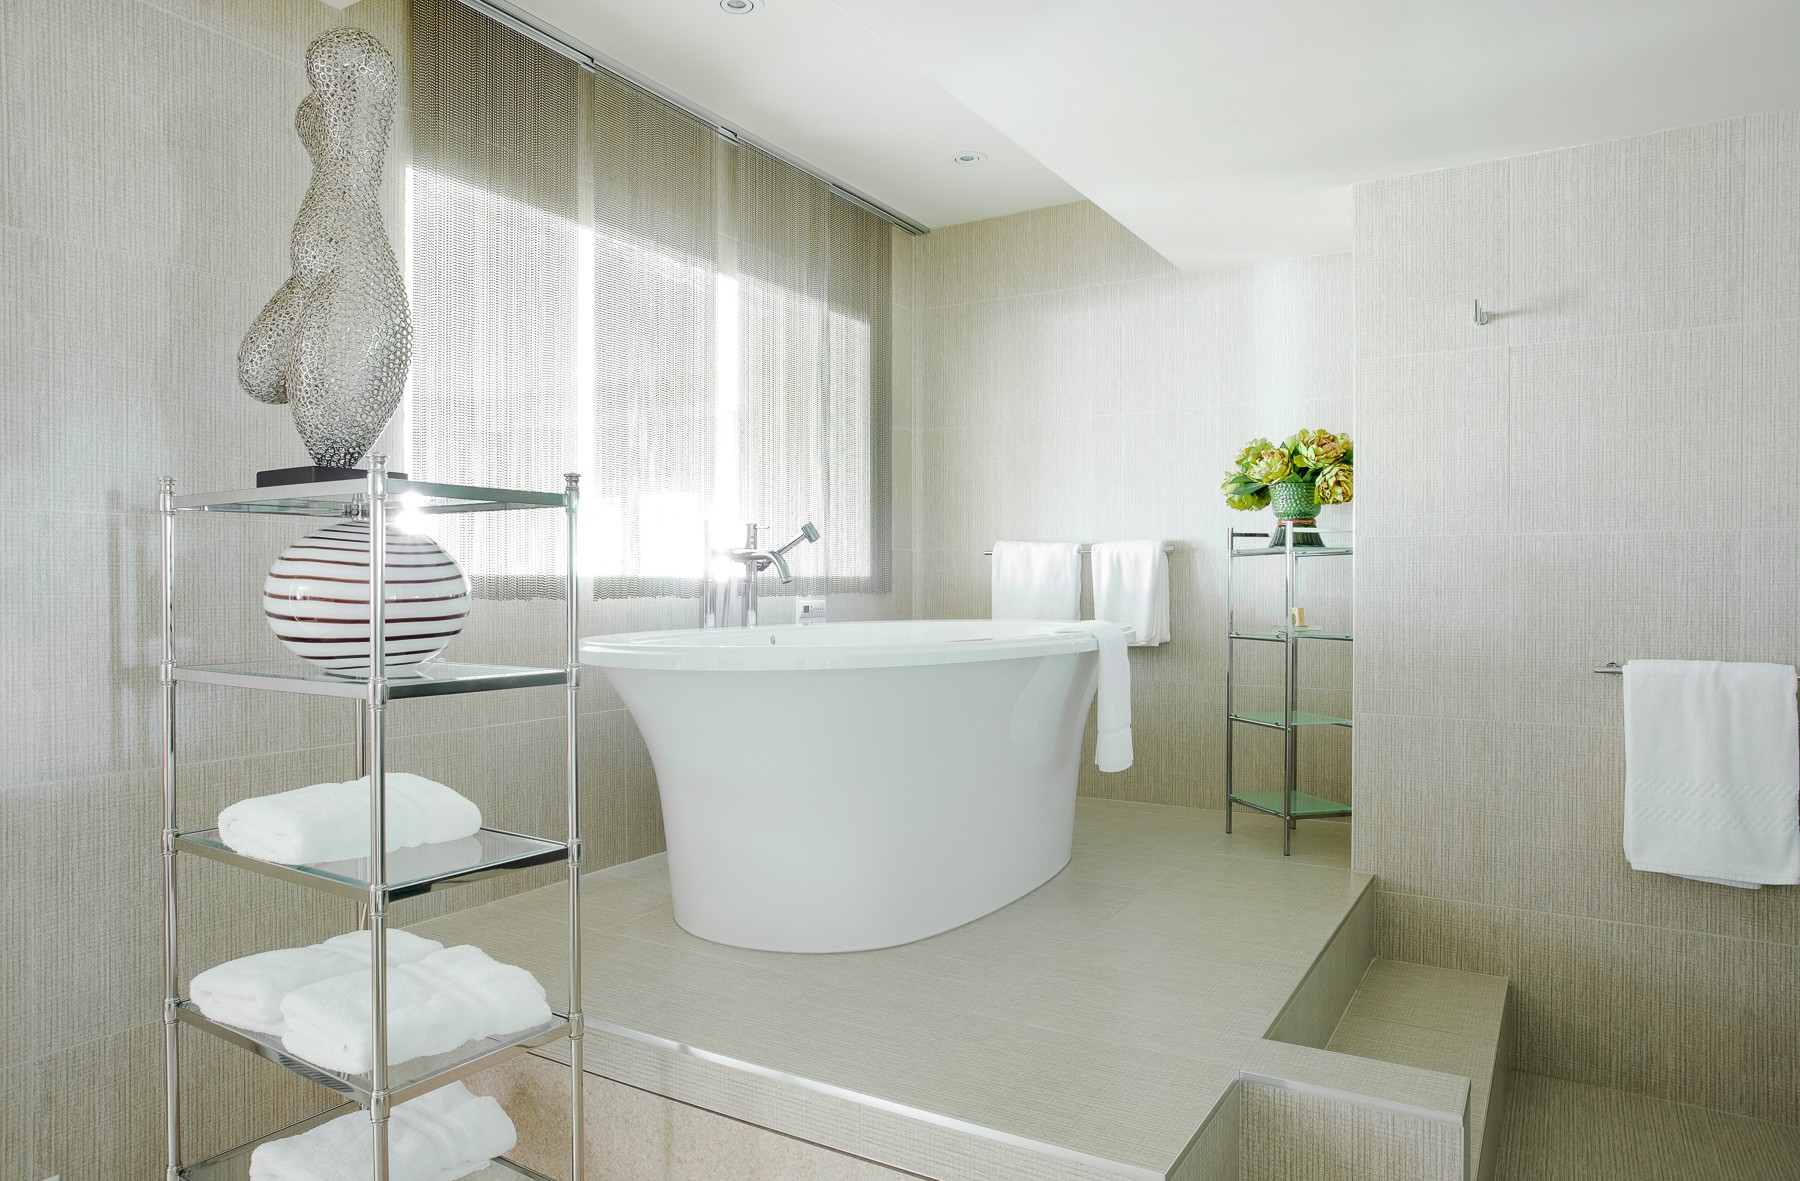 Bathtub in the middle of a bright and spacious room